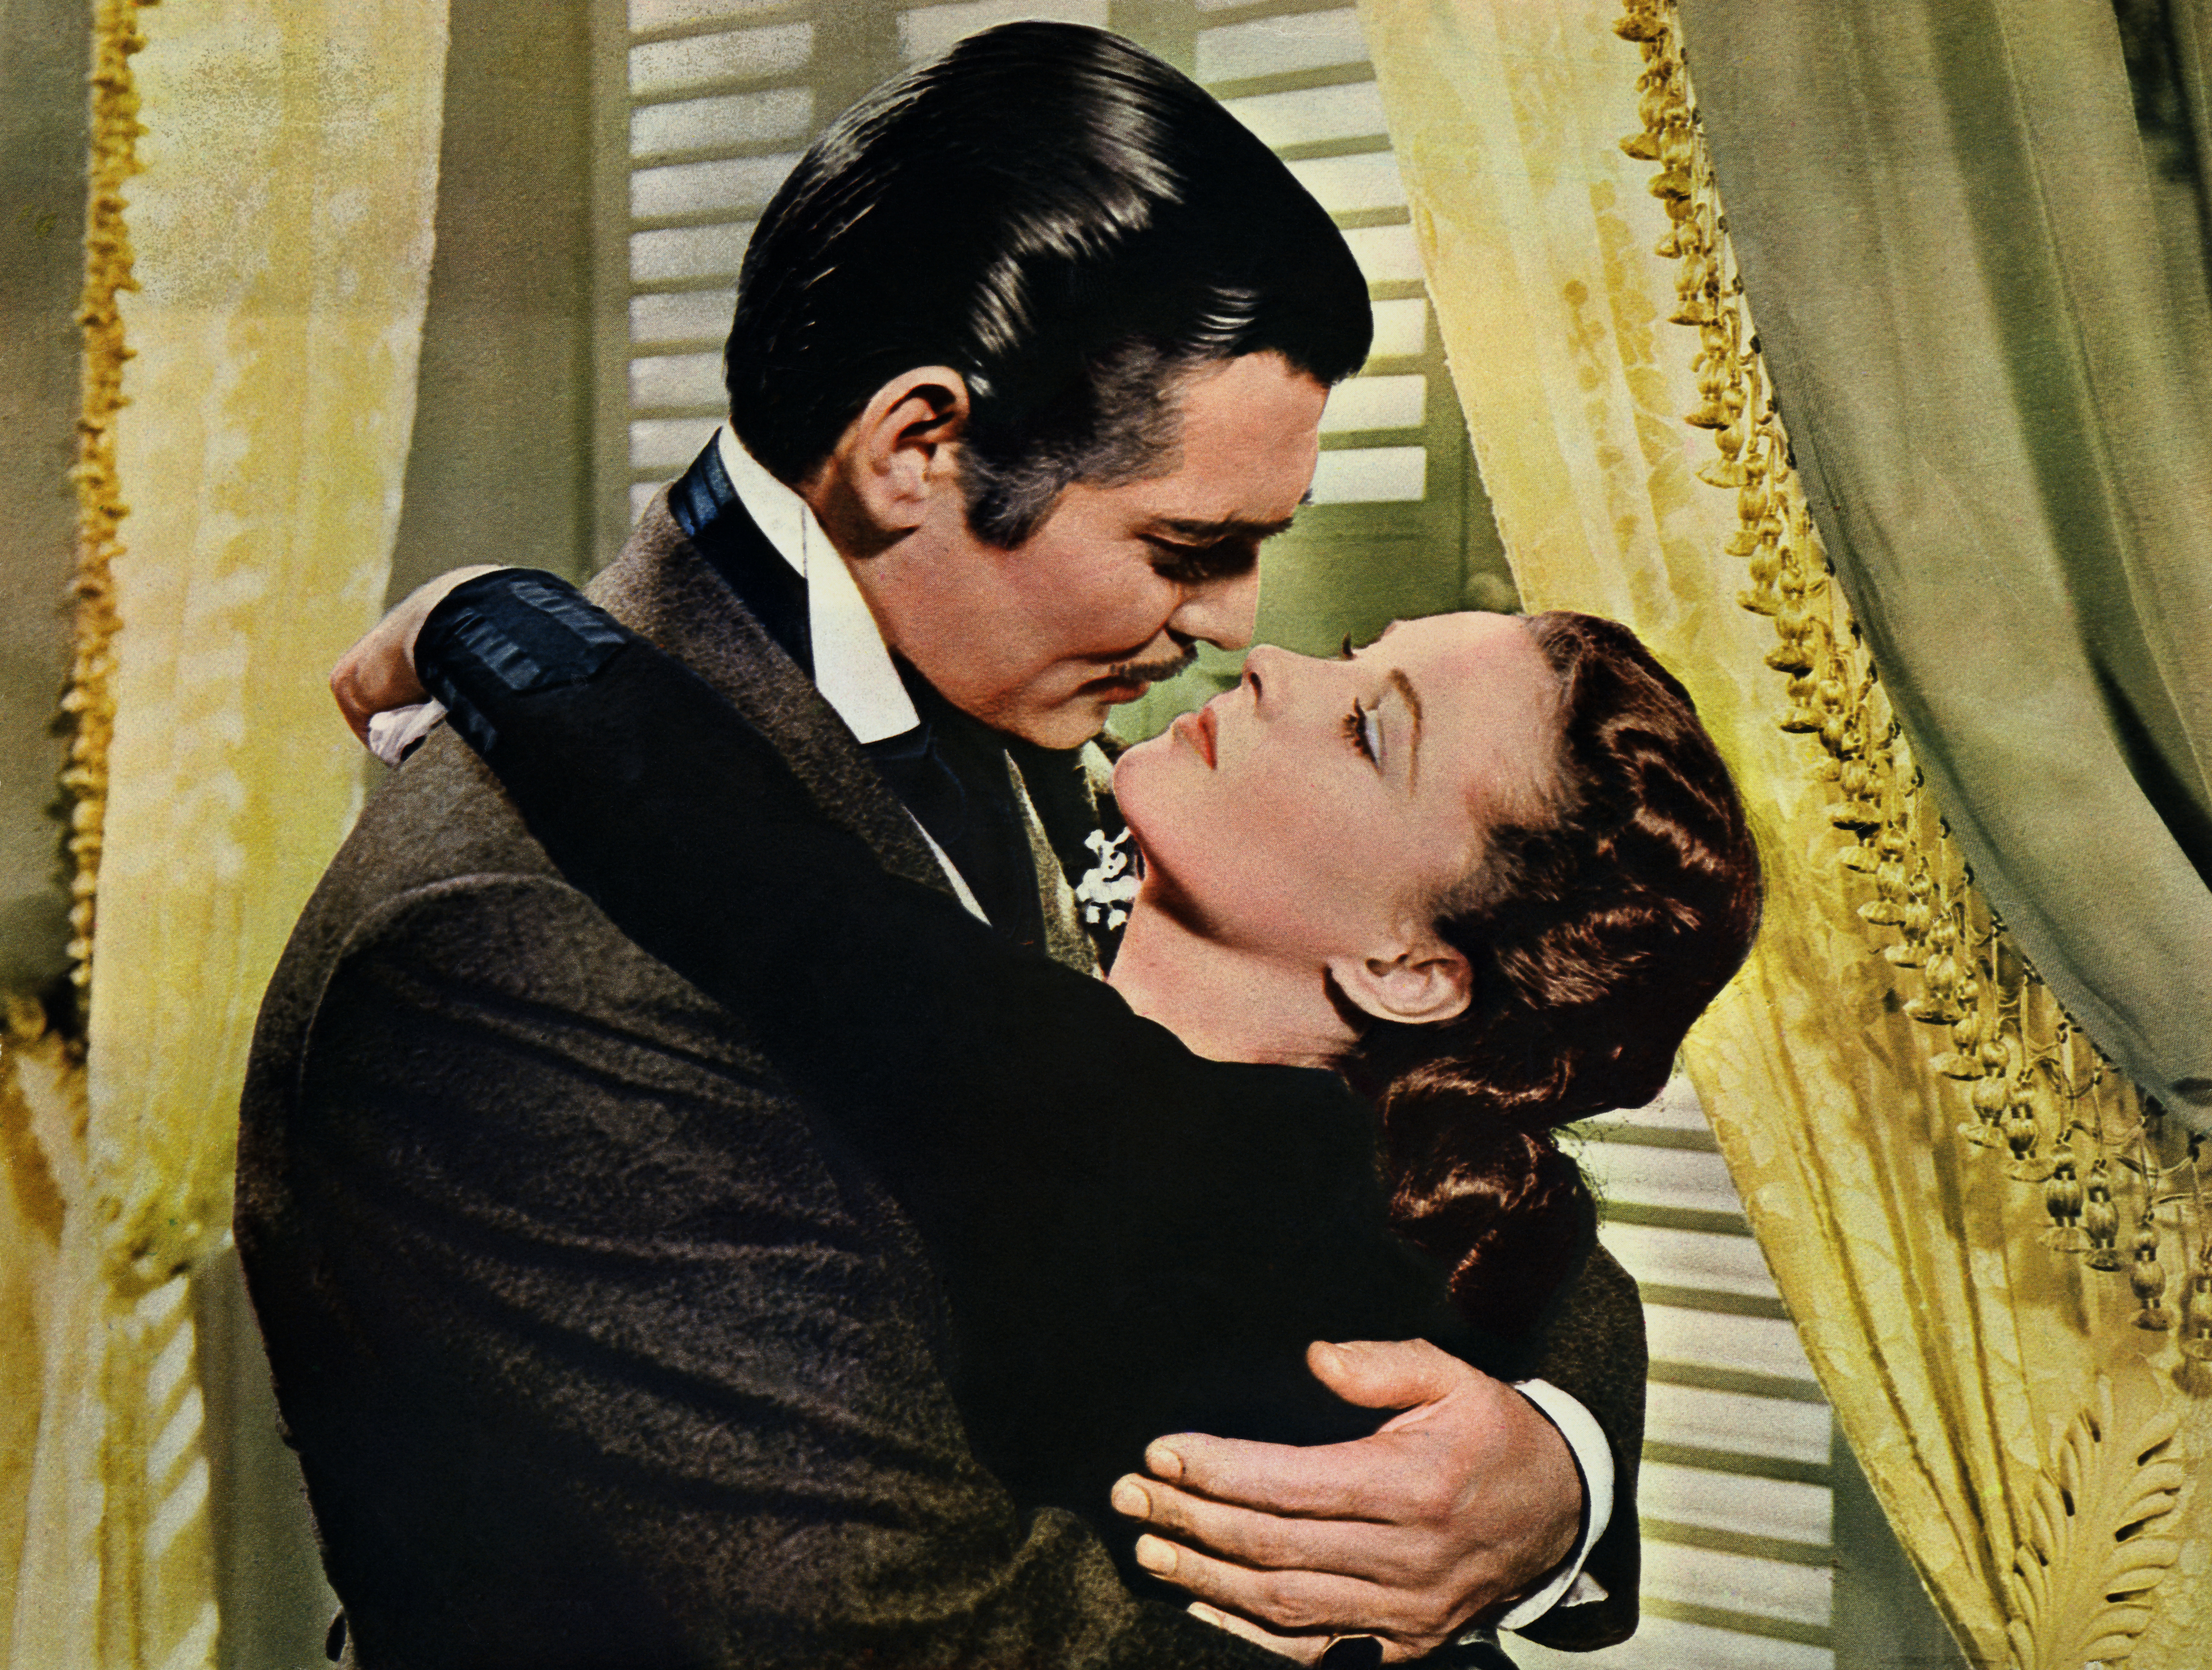 Details about  / Gone with the Wind Best American classic Romance Drama of all Blanket V2